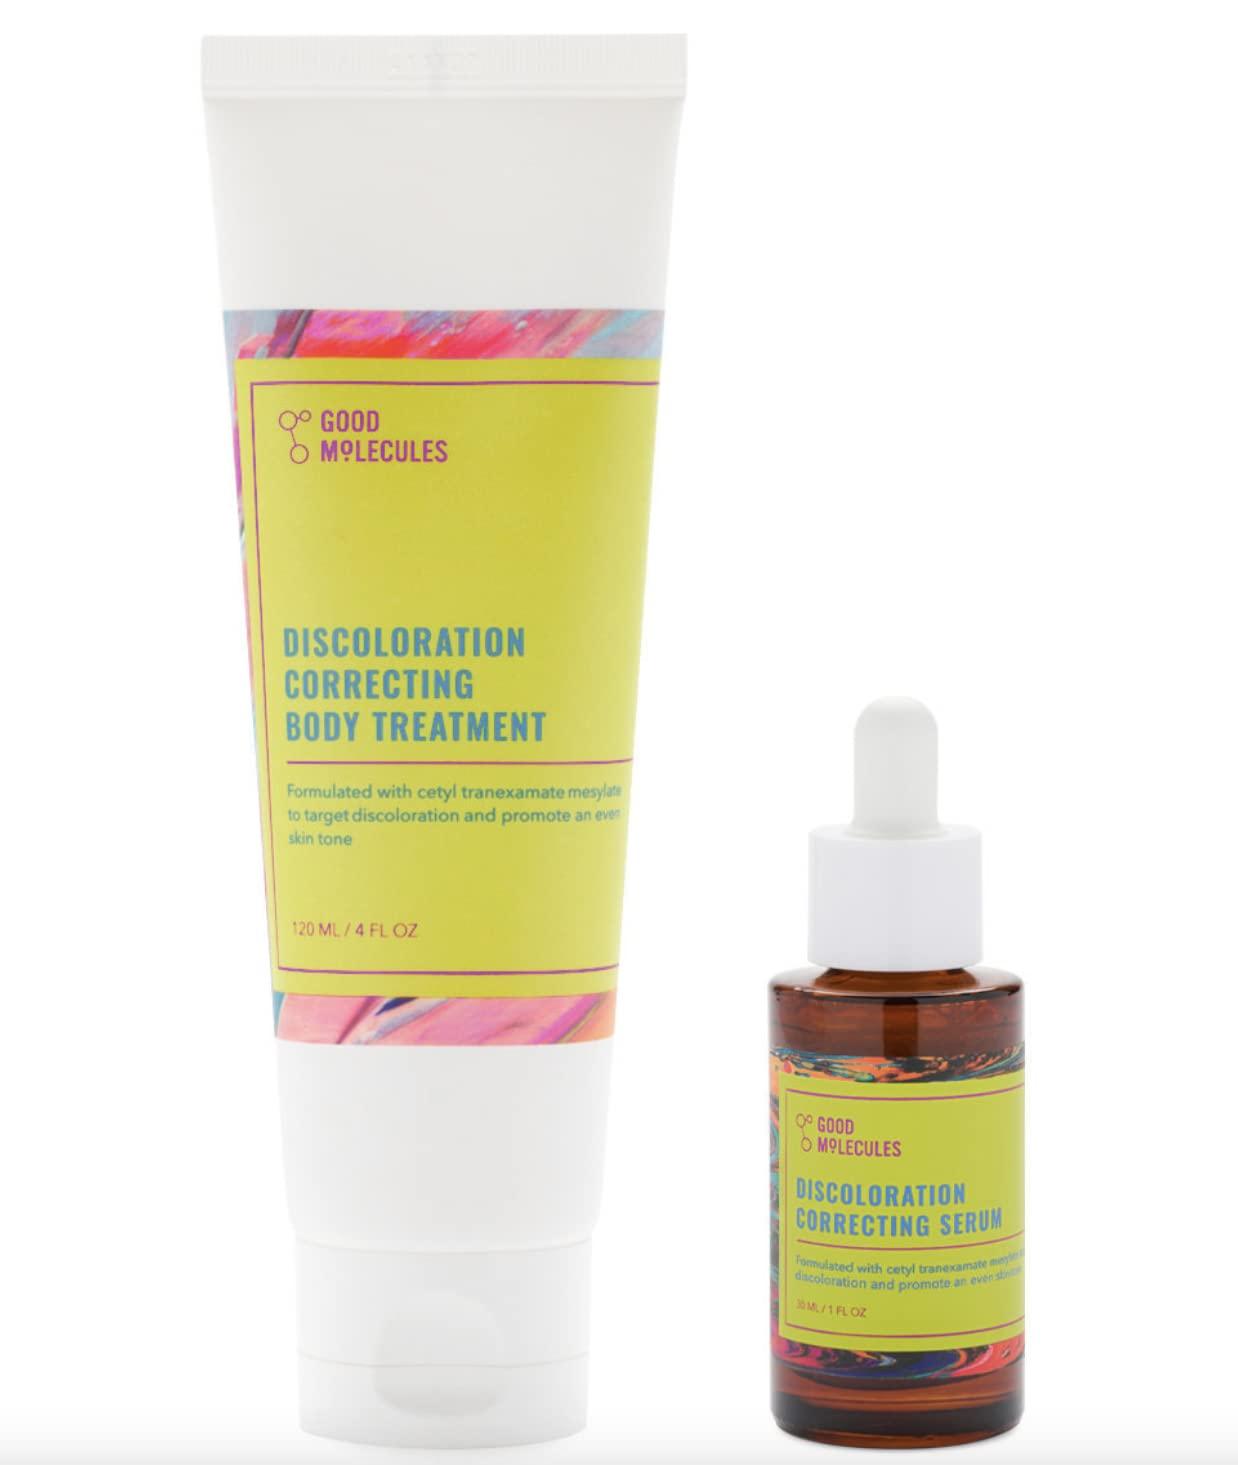 Good Molecules Discoloration Correcting Face Serum 30 Ml And